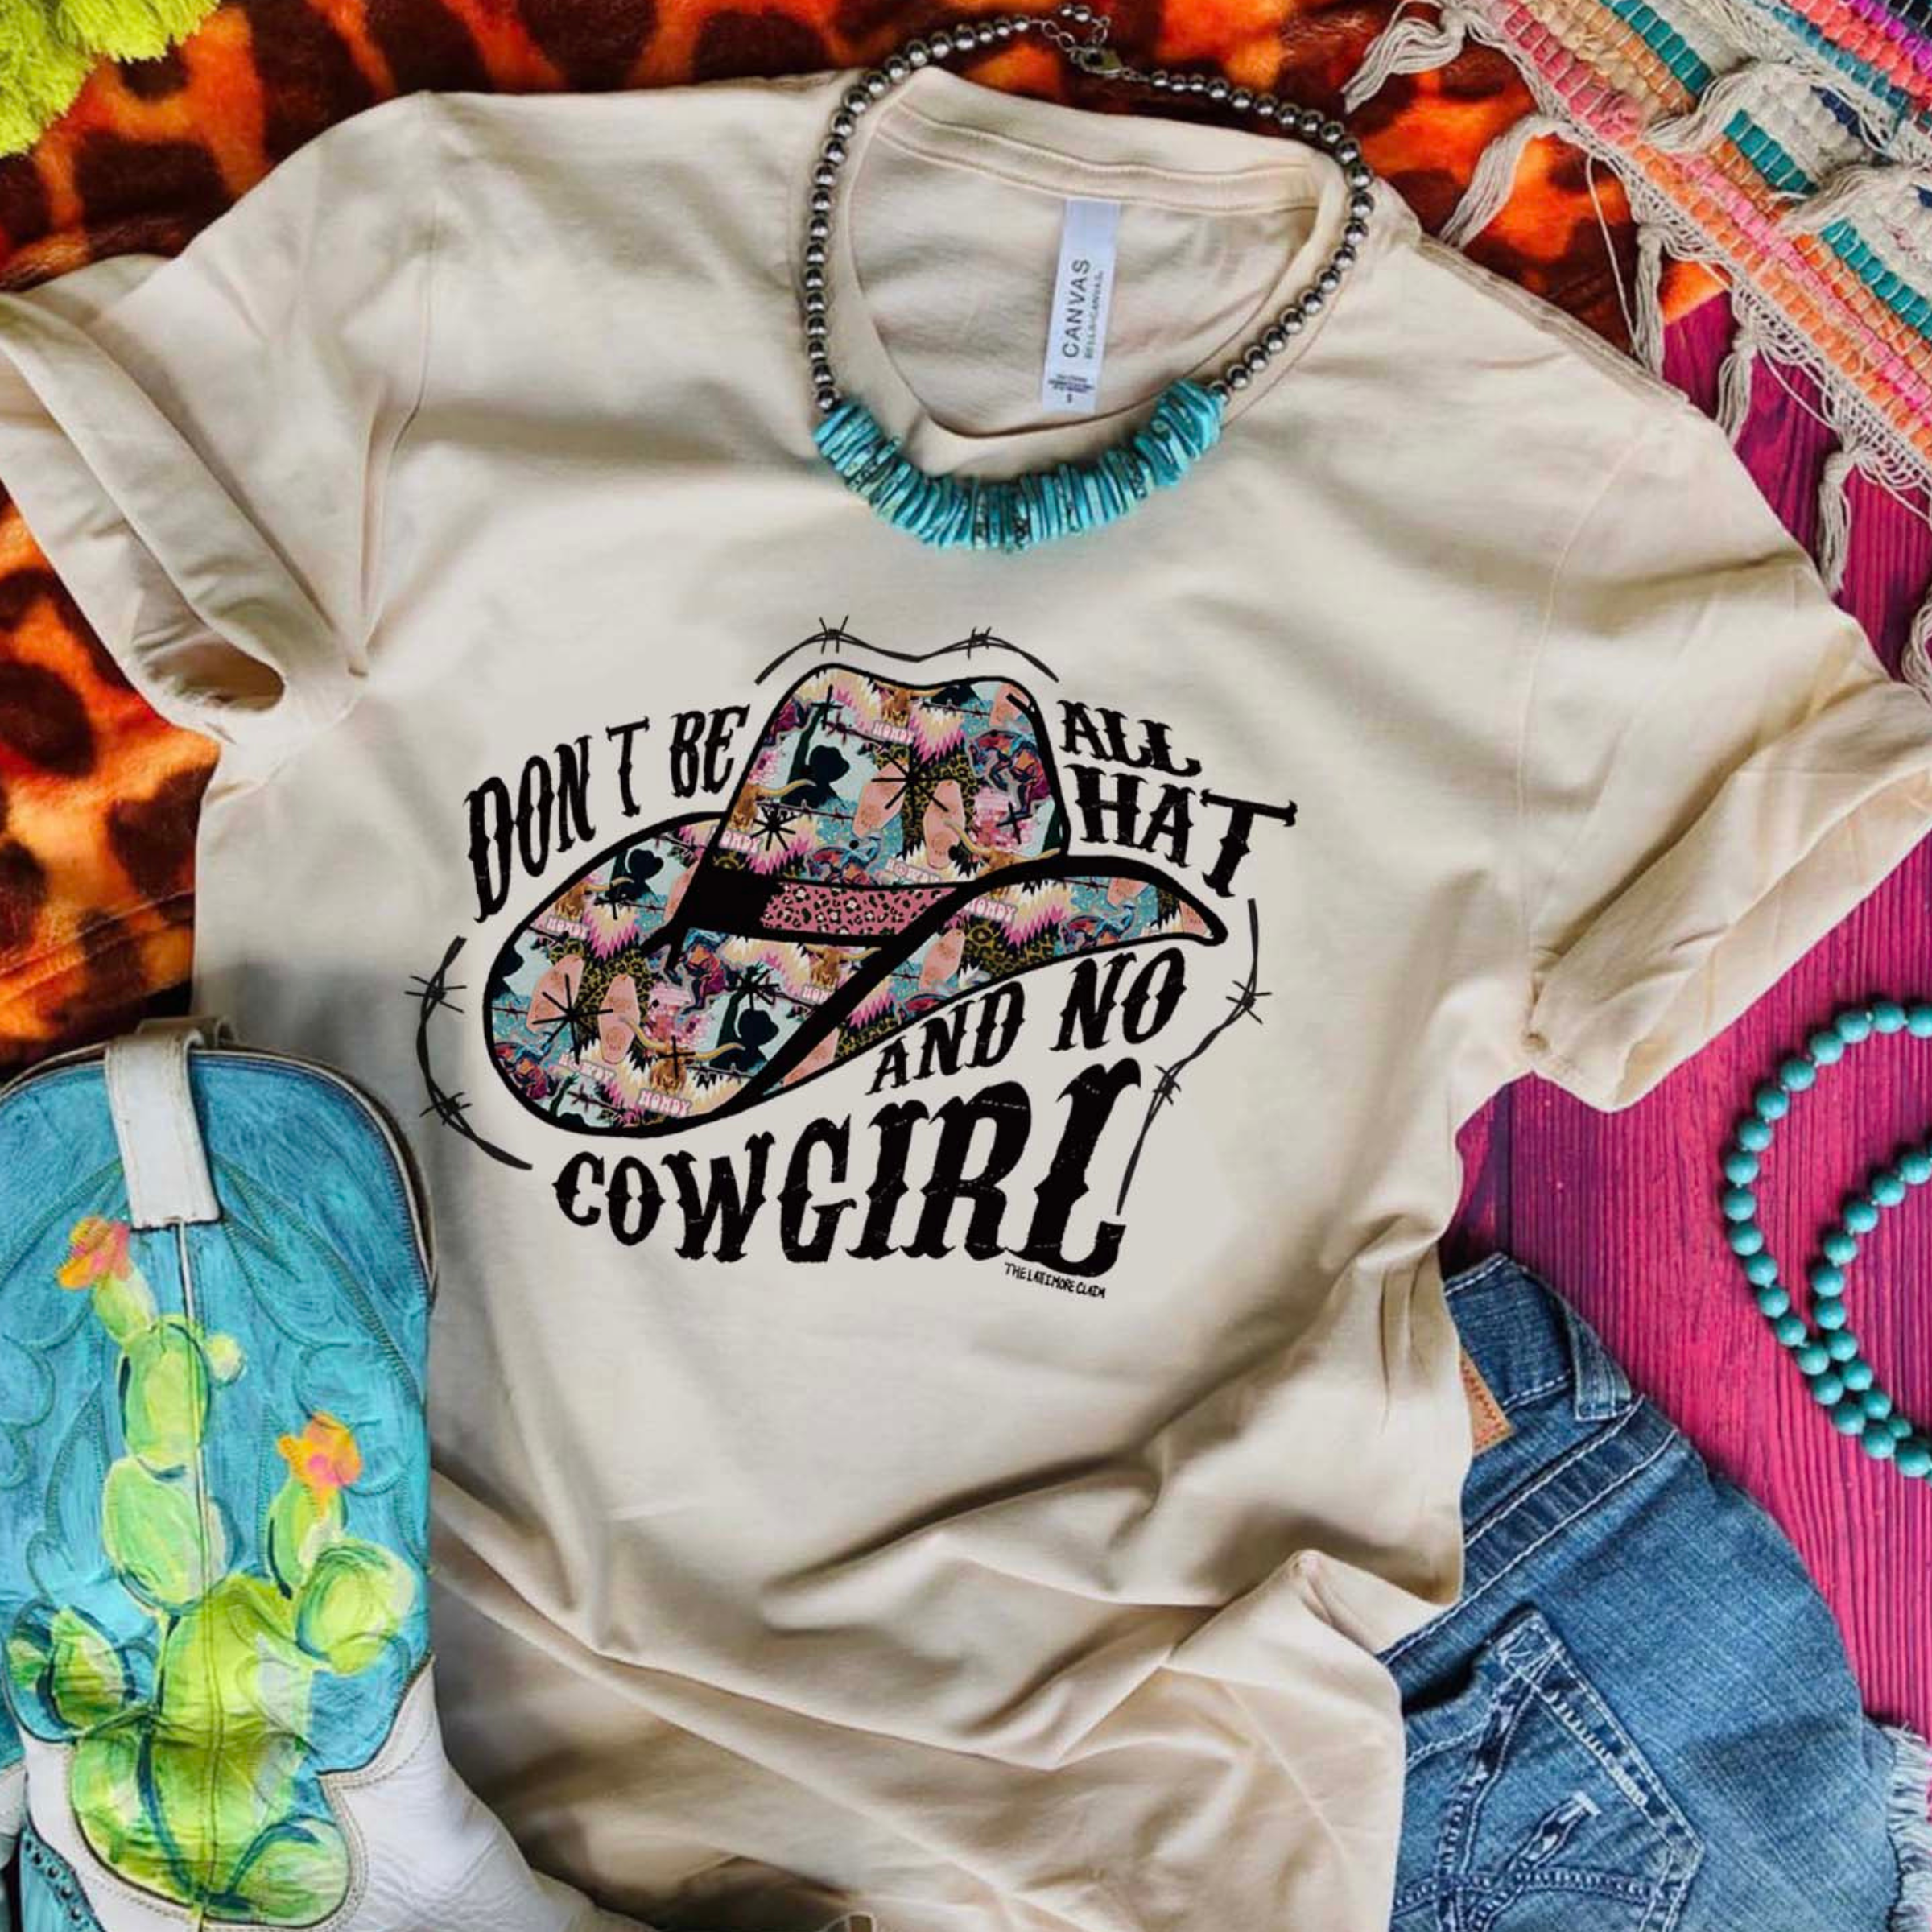 This cream Bella + Canvas graphic tee includes a crew neckline, short sleeves, and cute hand drawn design. of a cowboy hats when fun + bright prints, and the words "Don't Be All That And No Cowgirl". It also has black barbwire intertwined with the words and around the hat. This sweatshirt is shown in this photo to be styled as a flat lay with turquoise jewelry, denim jeans, and a pair of cowboy boots that have a cactus on them. 